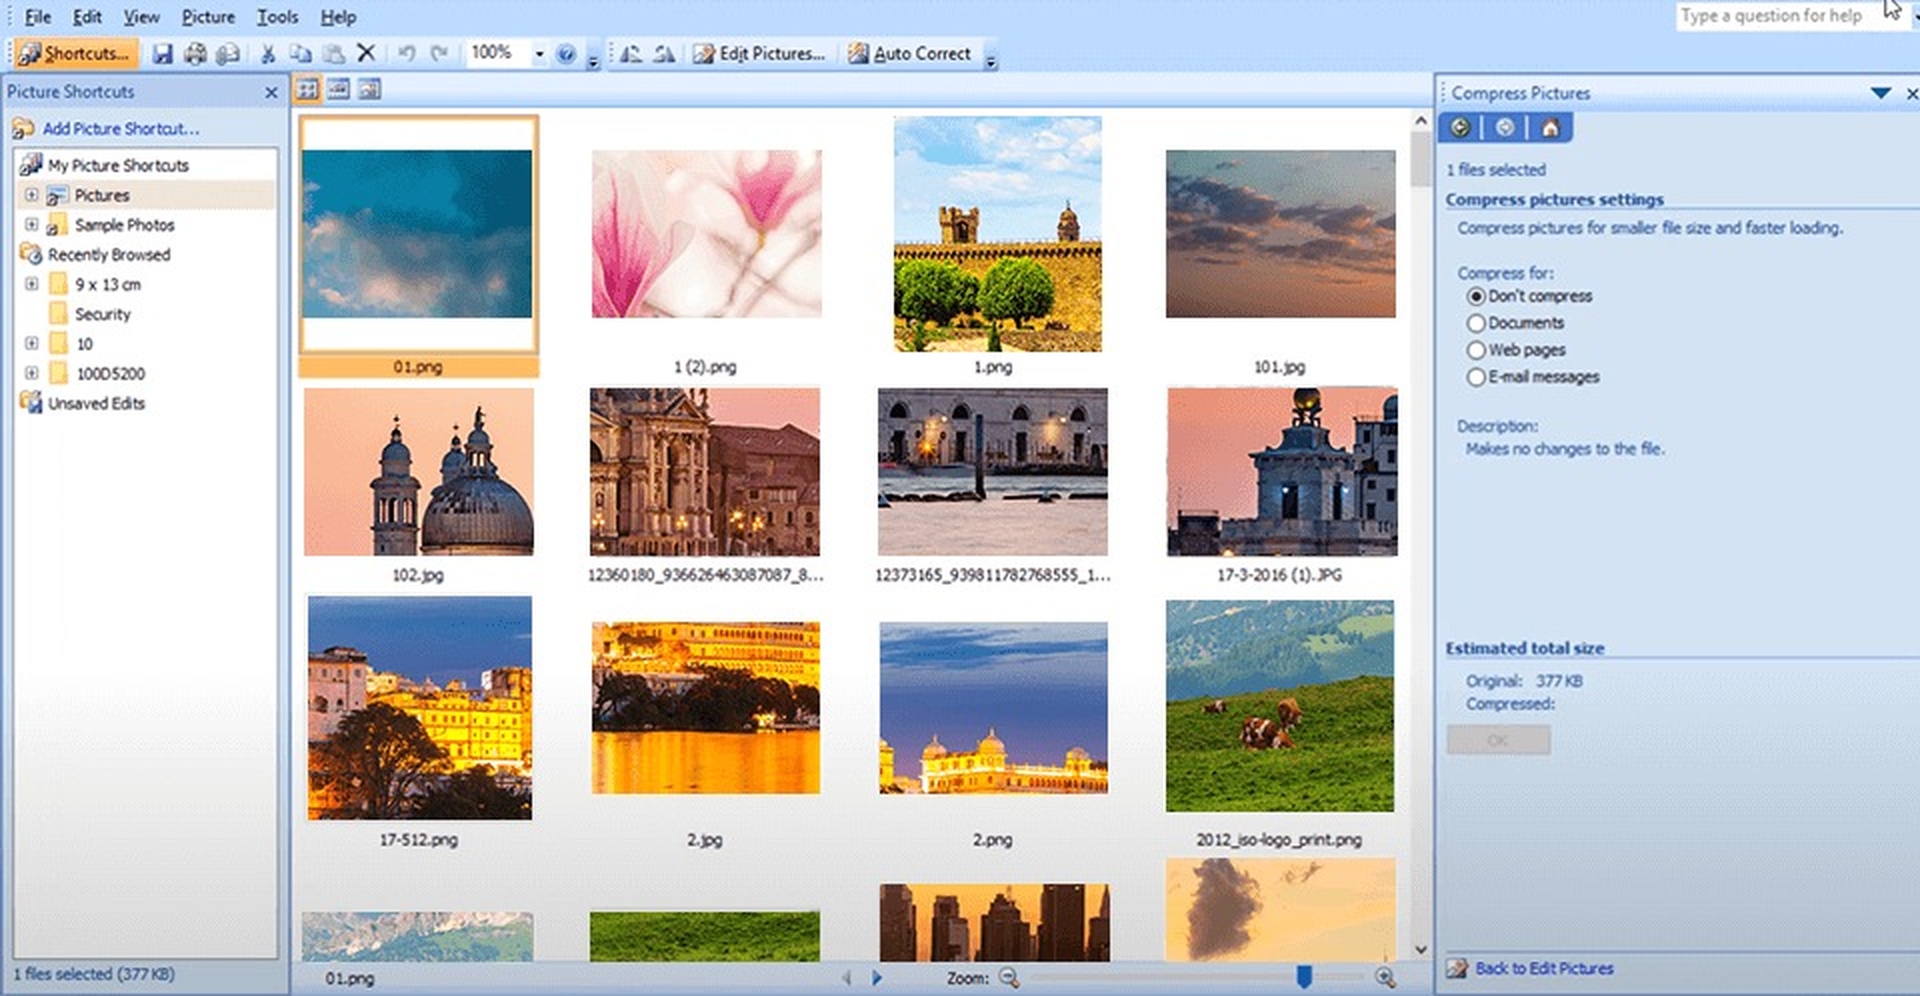 In this article, we are going to cover what is meant by Microsoft Office Picture Manager, so you can learn what this tool is used for and how to use it.